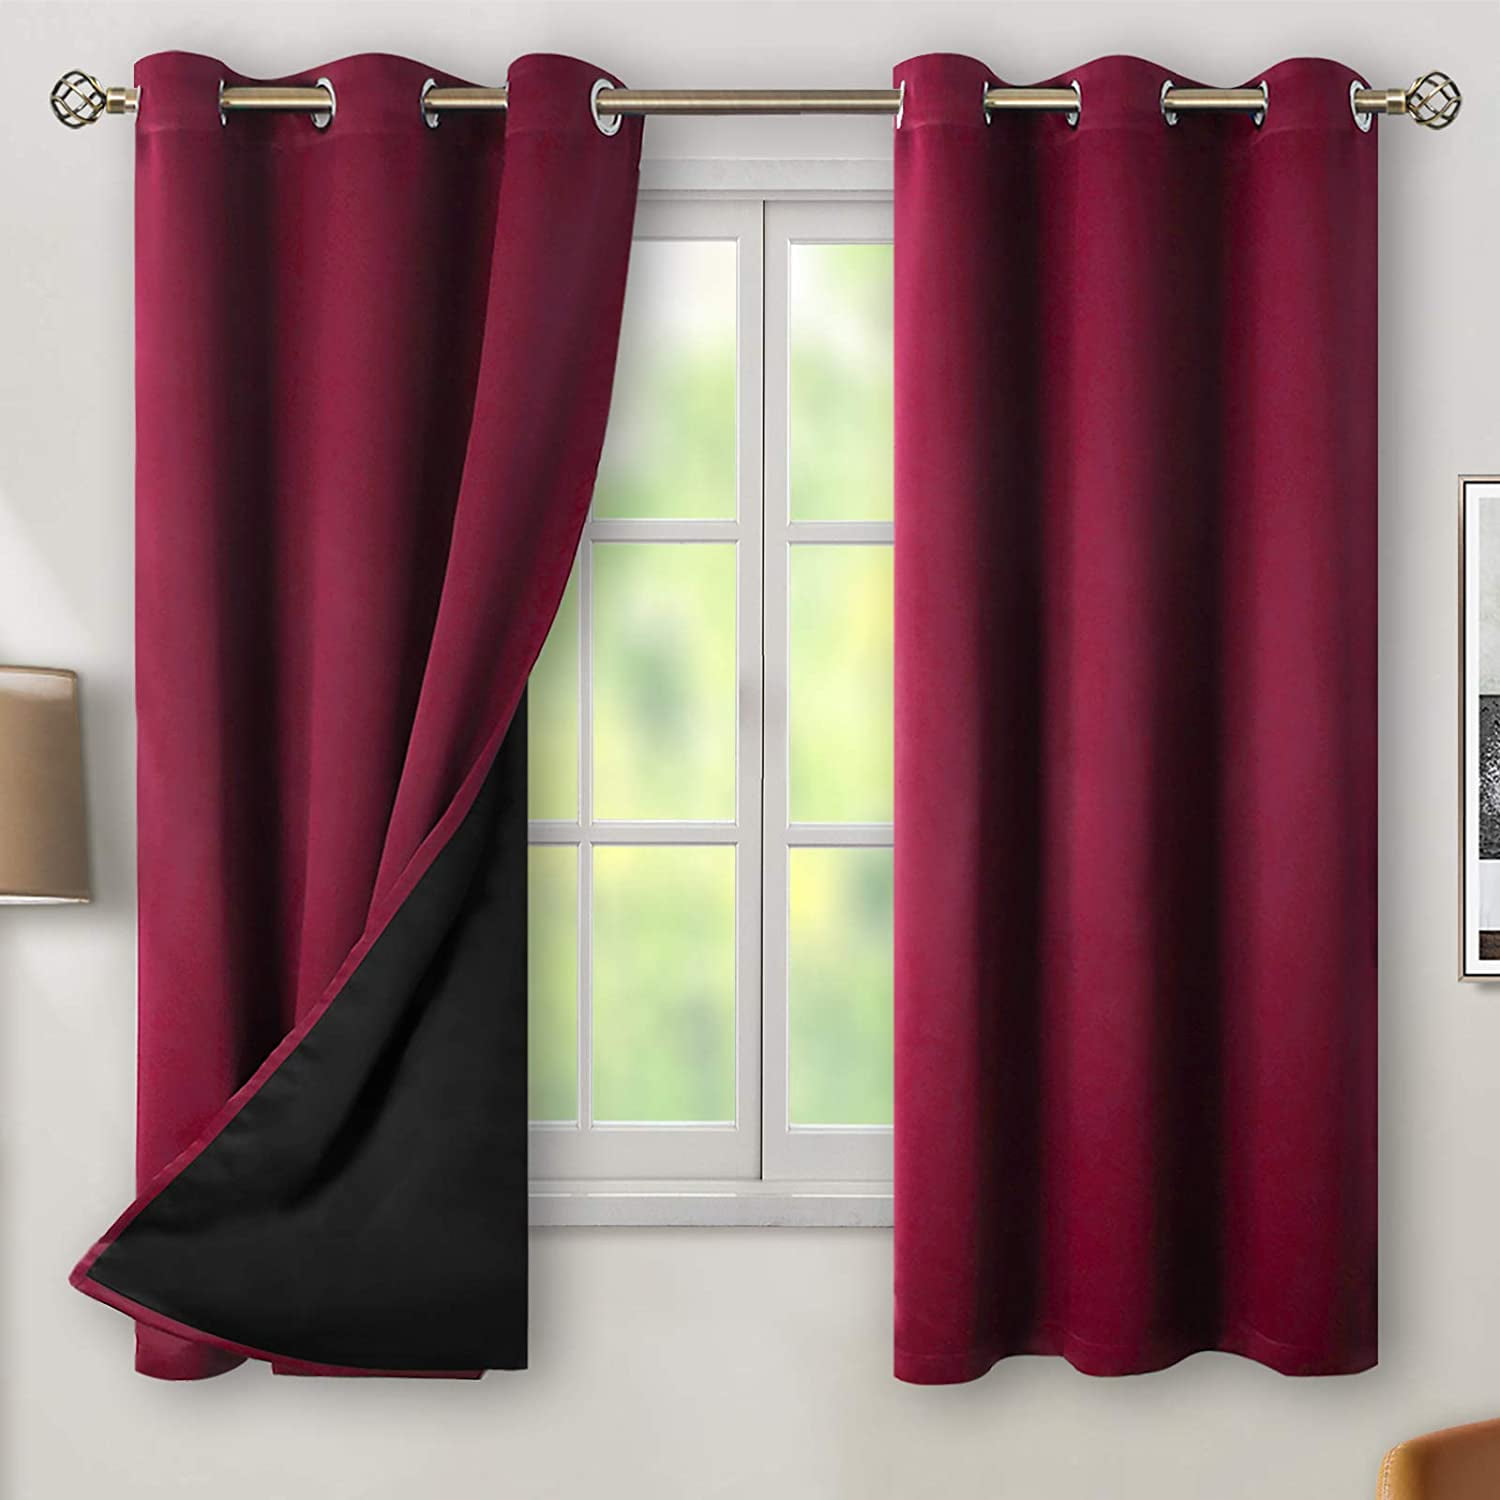 Blackout Curtains Black for Bedroom Thermal Insulated Room Darkening Curtains 